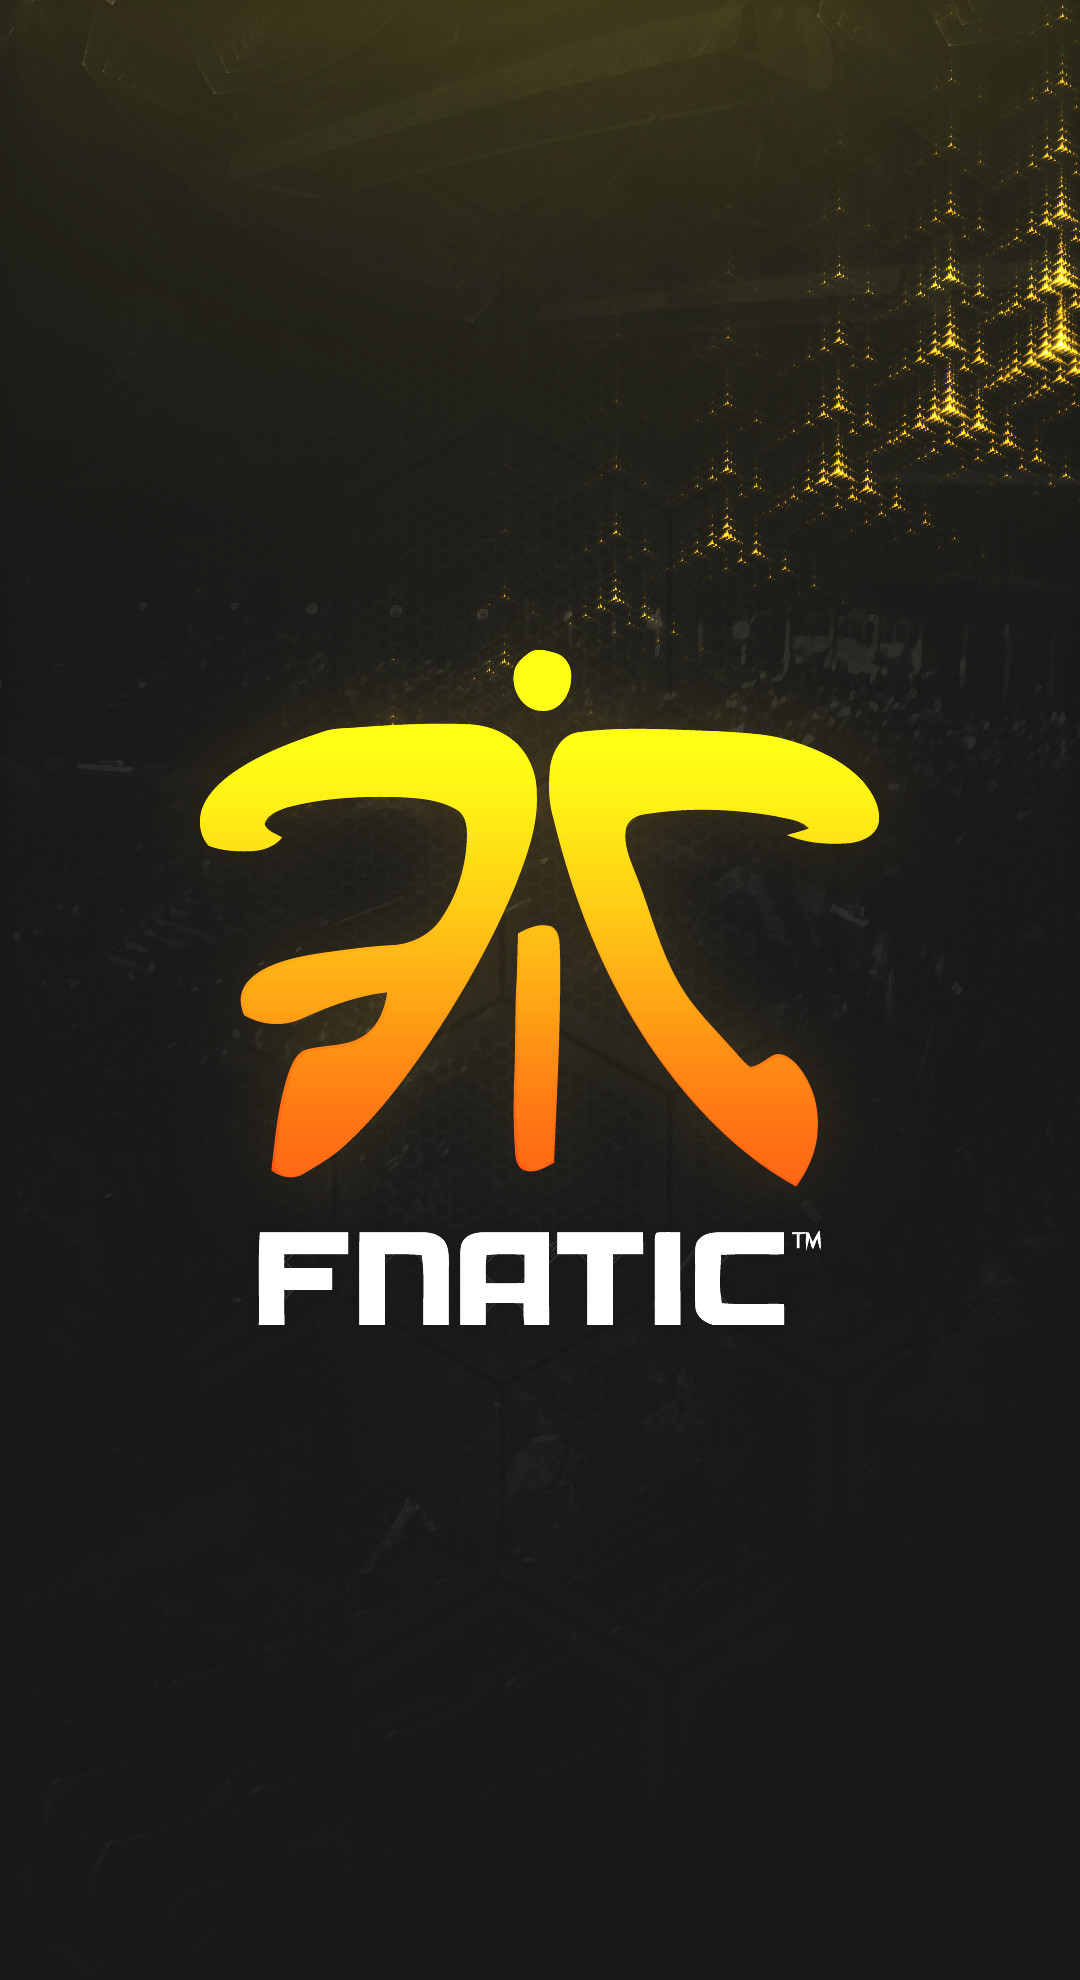 1080x1980 Fnatic: http://imgie.pl/uploads/145867286492371.png